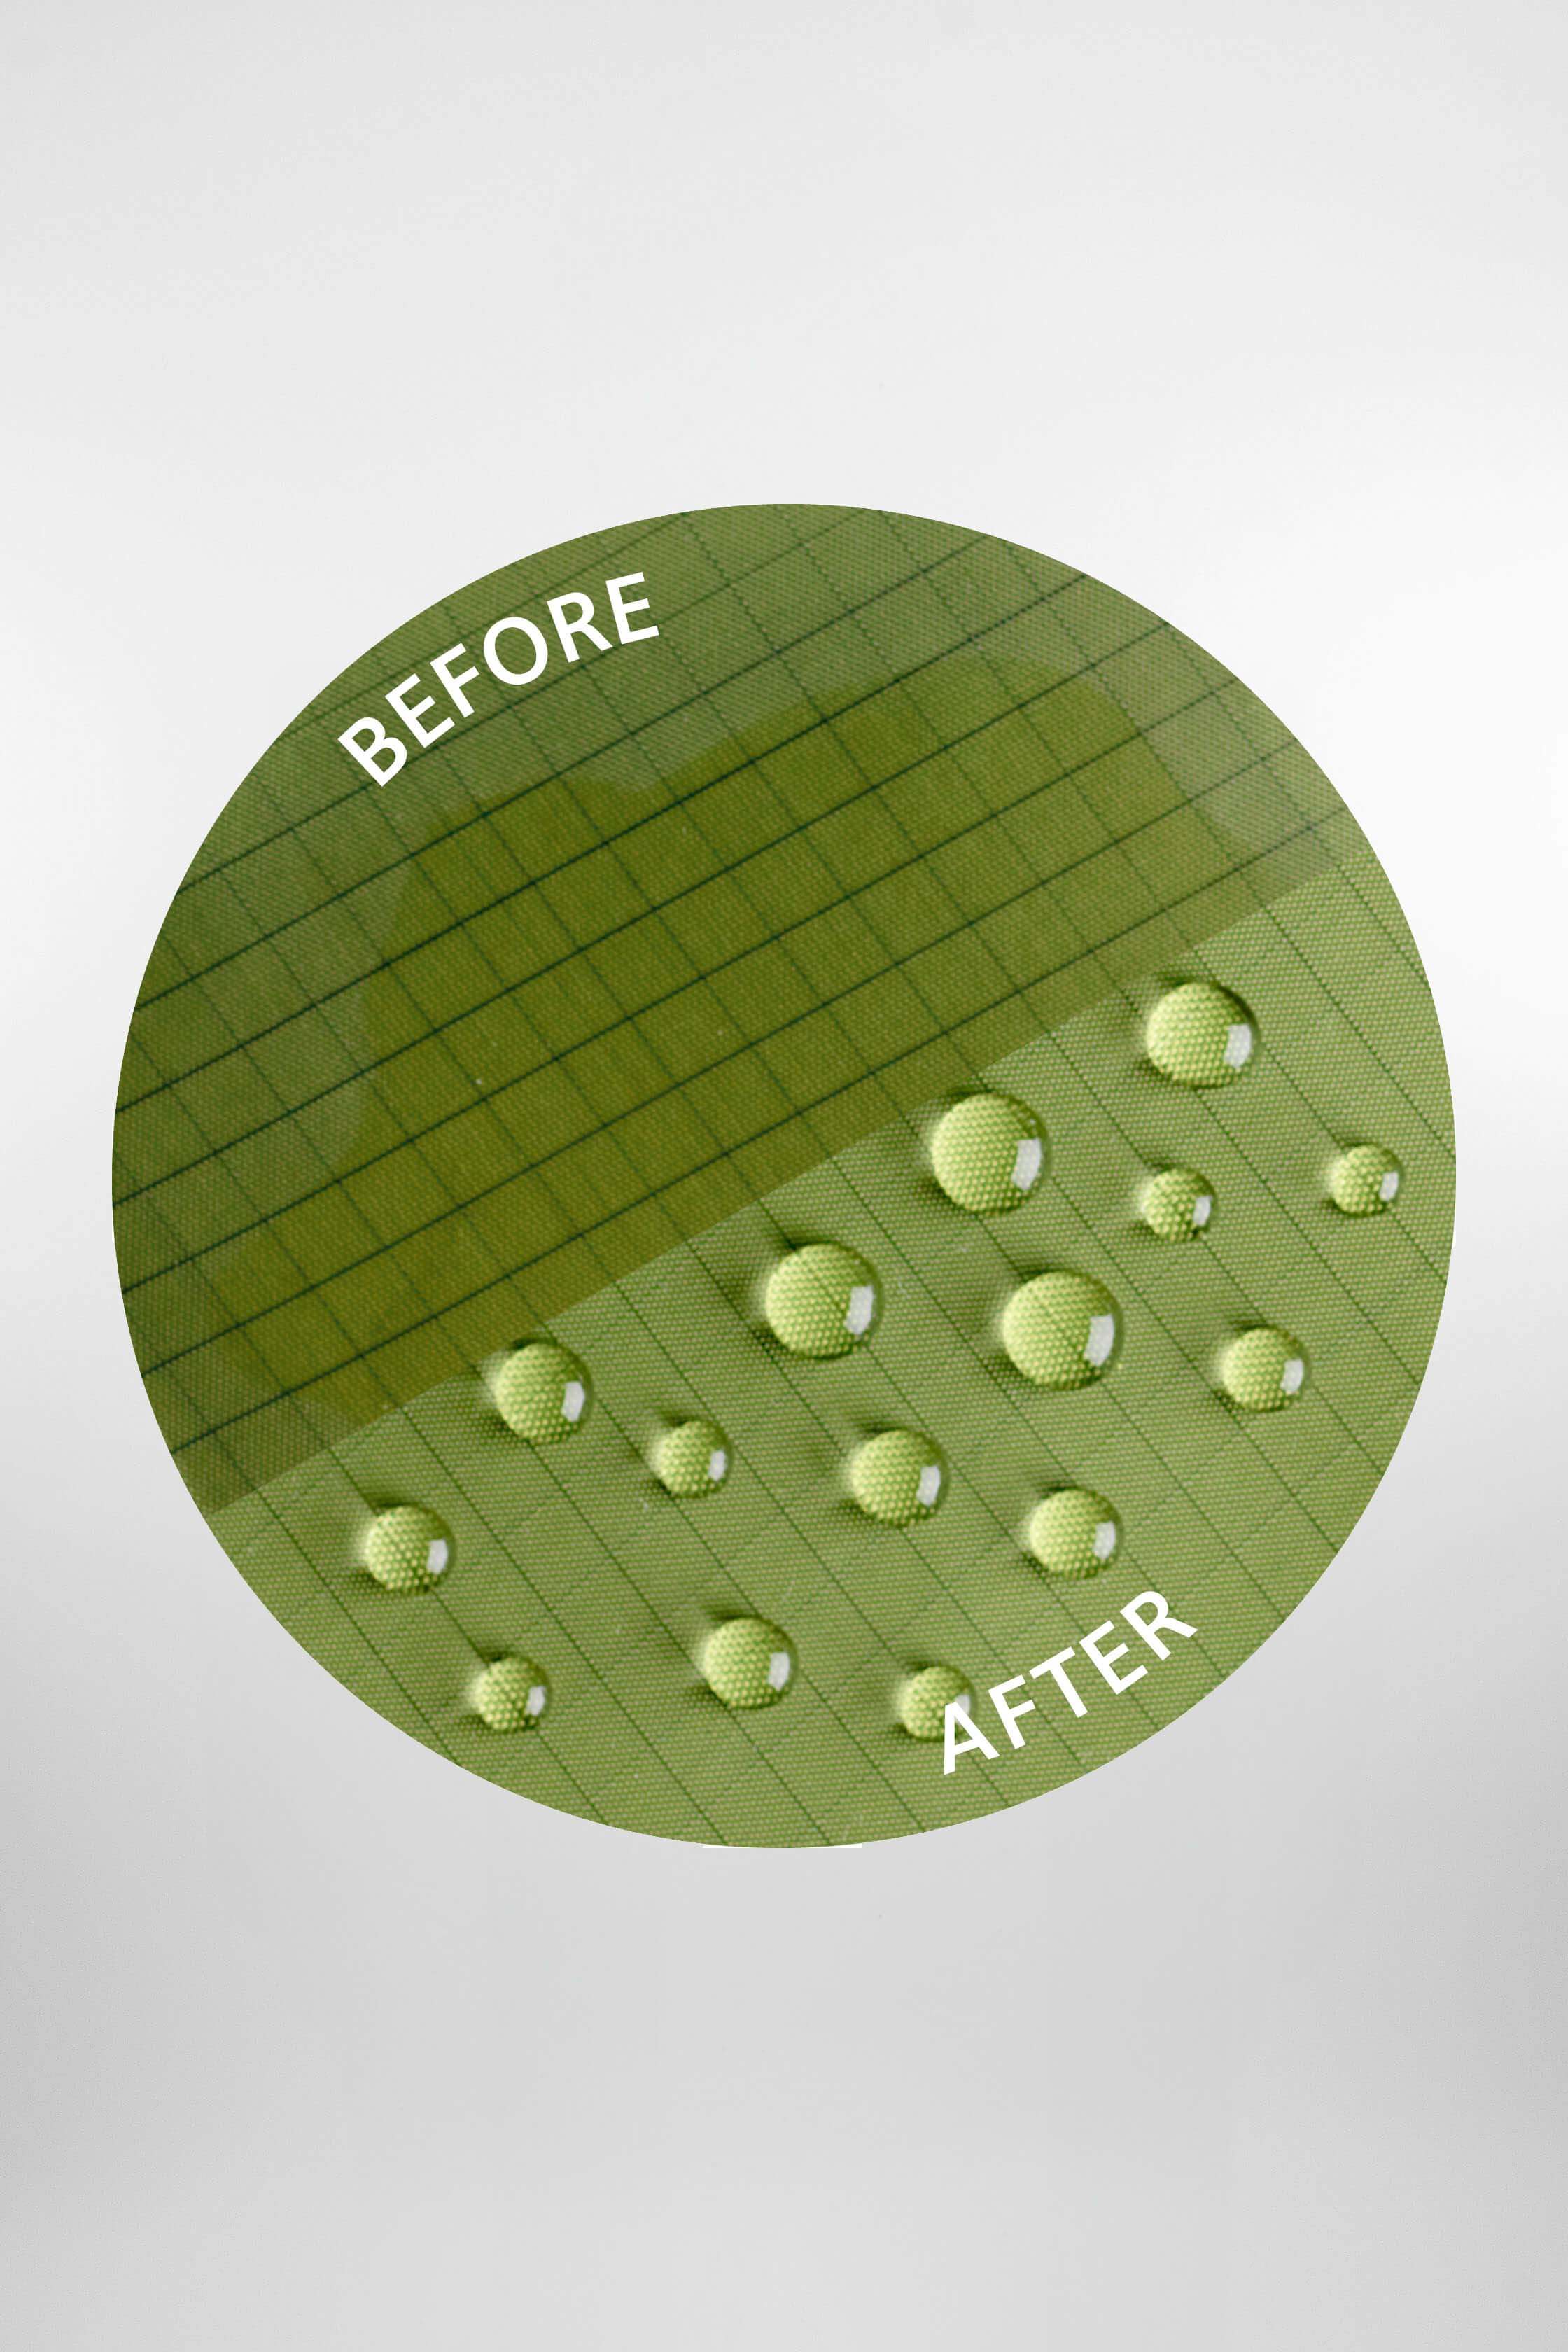 A picture of a before and after when using Organotex spray-on textile waterproofing